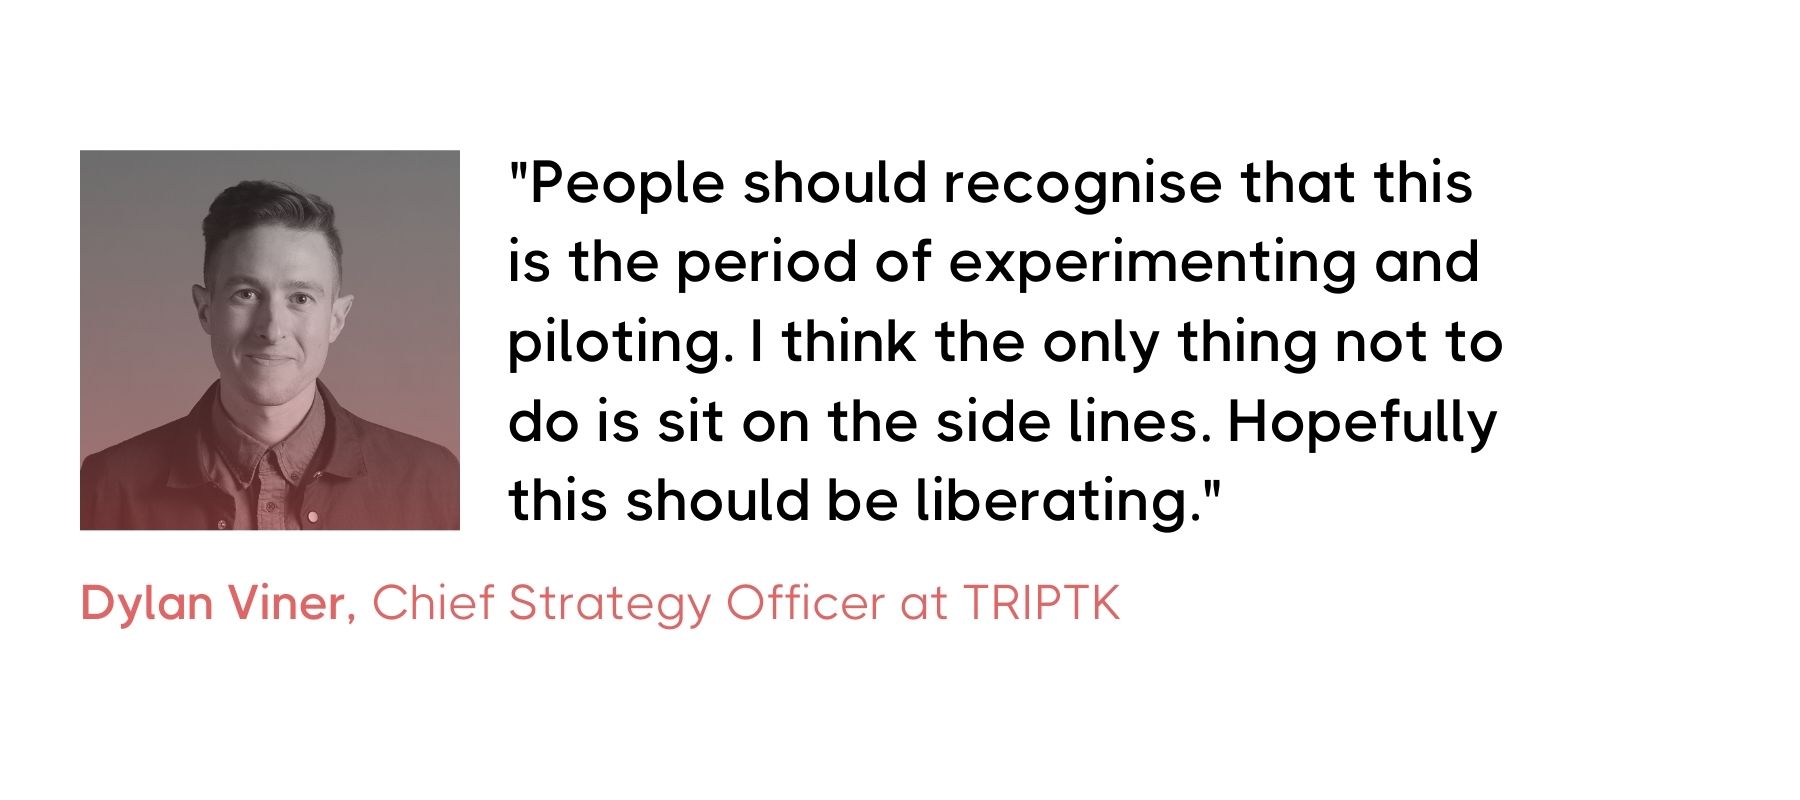 Promotional image featuring Dylan Viner, Chief Strategy Officer at TRIPTK. It includes a professional headshot of Dylan, a man with short hair, wearing a rose-colored shirt. Next to his image, a quote reads: 'People should recognise that this is the period of experimenting and piloting. I think the only thing not to do is sit on the sidelines. Hopefully this should be liberating.'